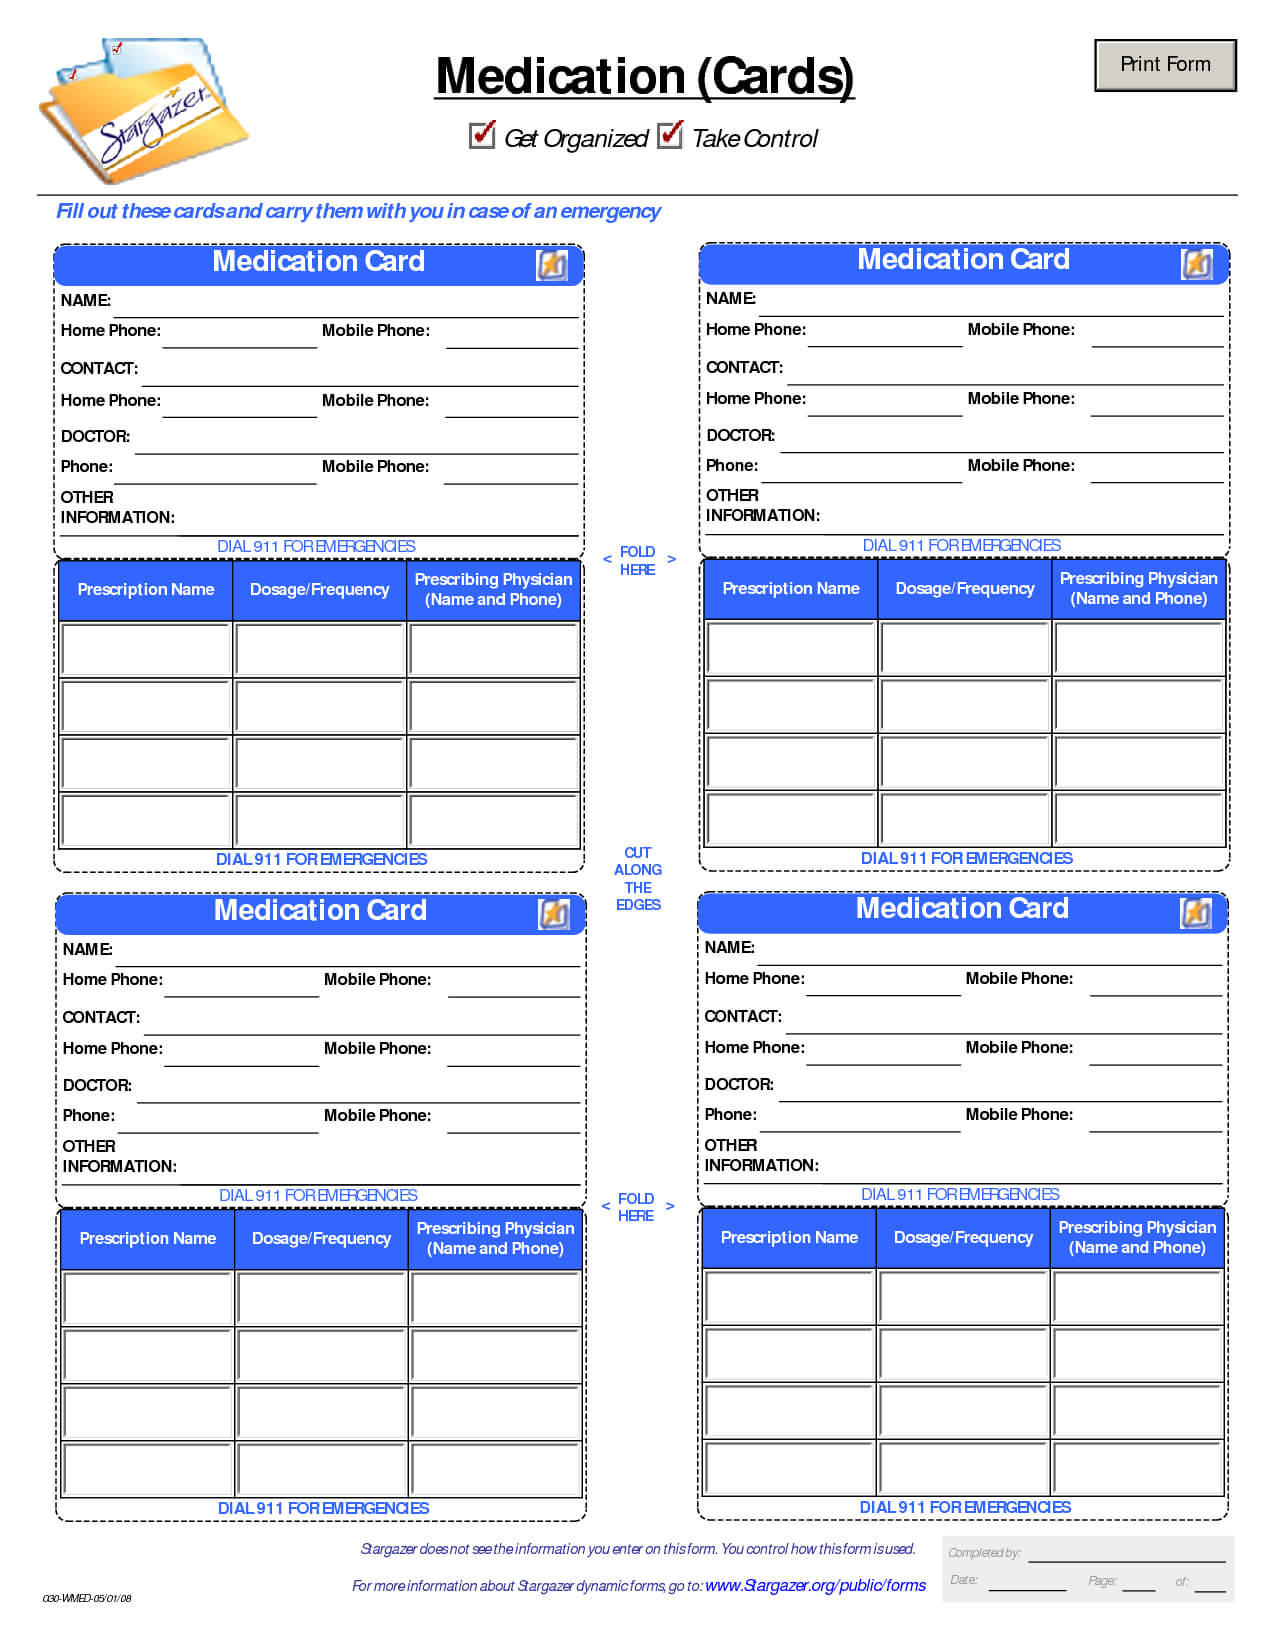 Patient Medication Card Template | Medication List, Medical For Medical Alert Wallet Card Template